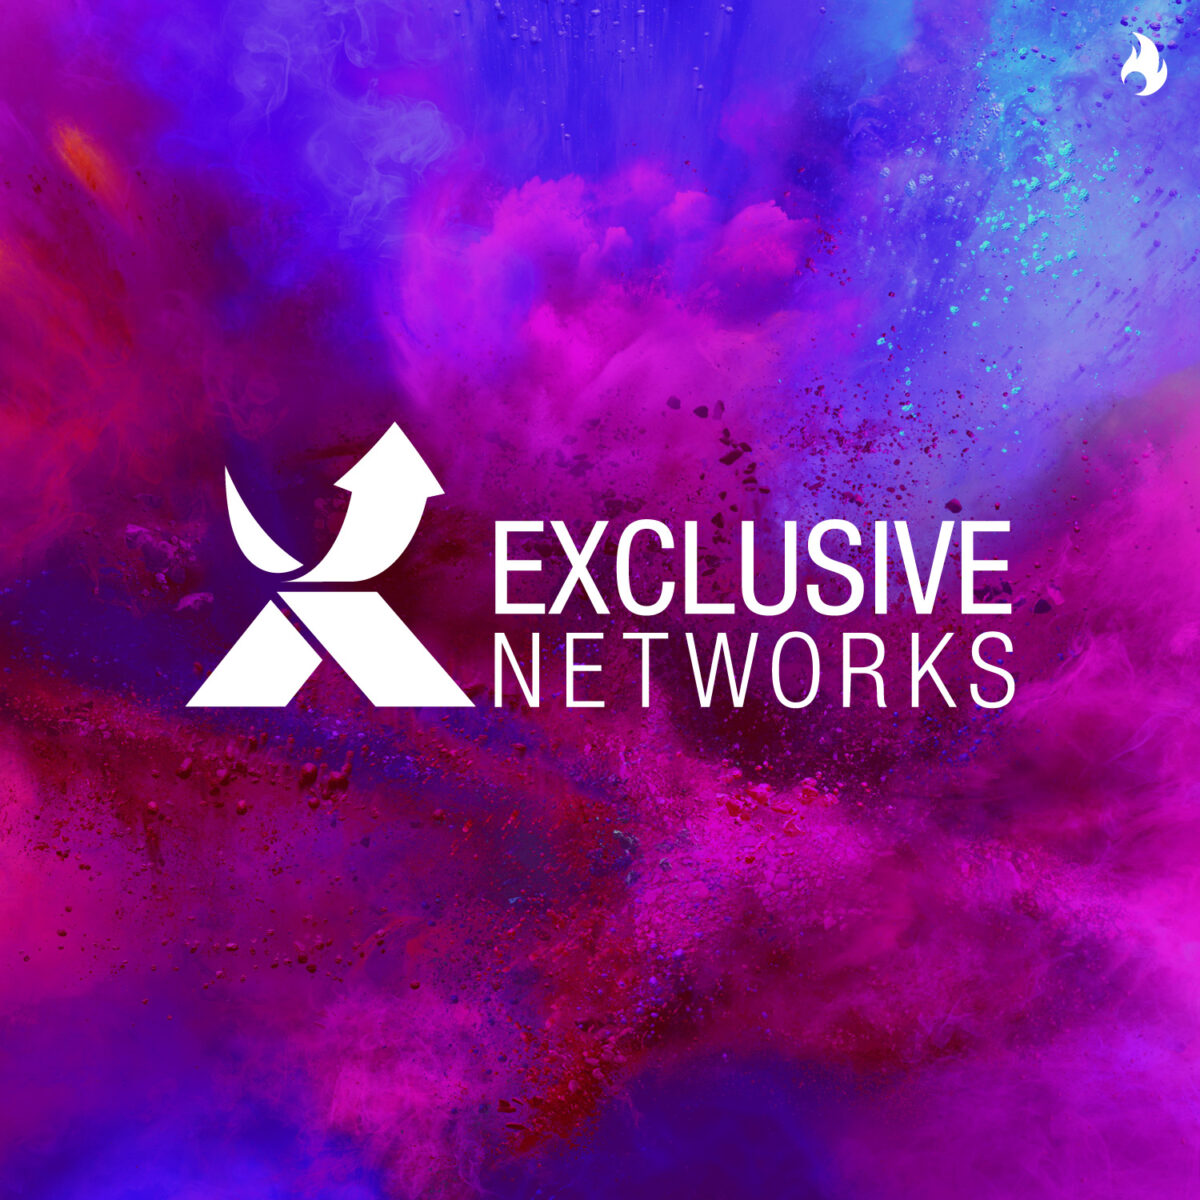 News thumbnail of the Exclusive Networks logo, with Exclusive Networks branding